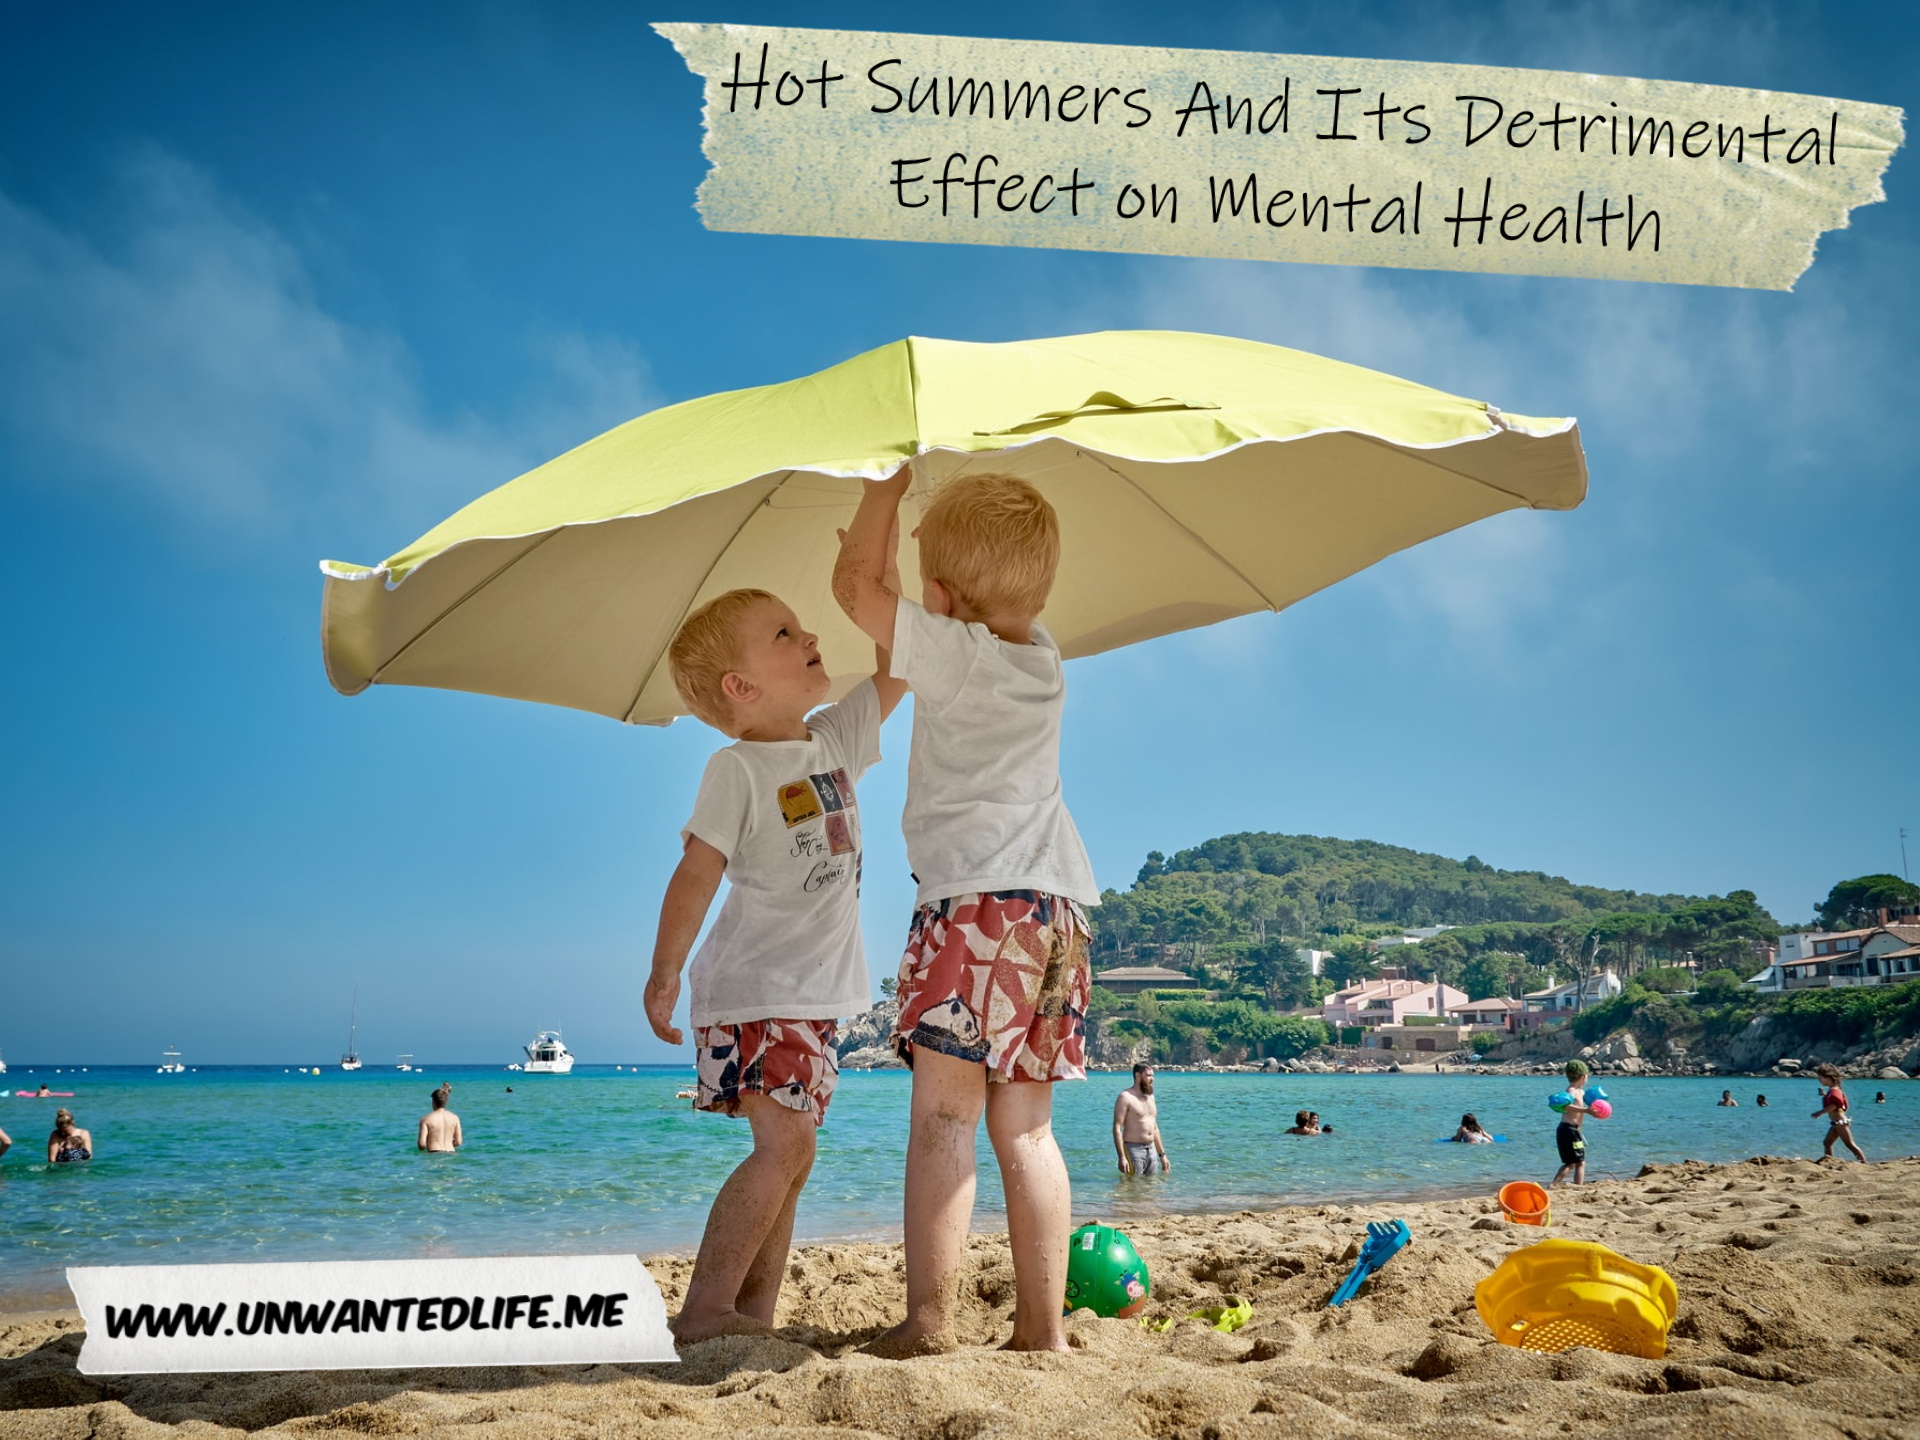 A photo of two White children at the beach putting up a parasol to represent the topic of the article - Hot Summers And Its Detrimental Effect on Mental Health